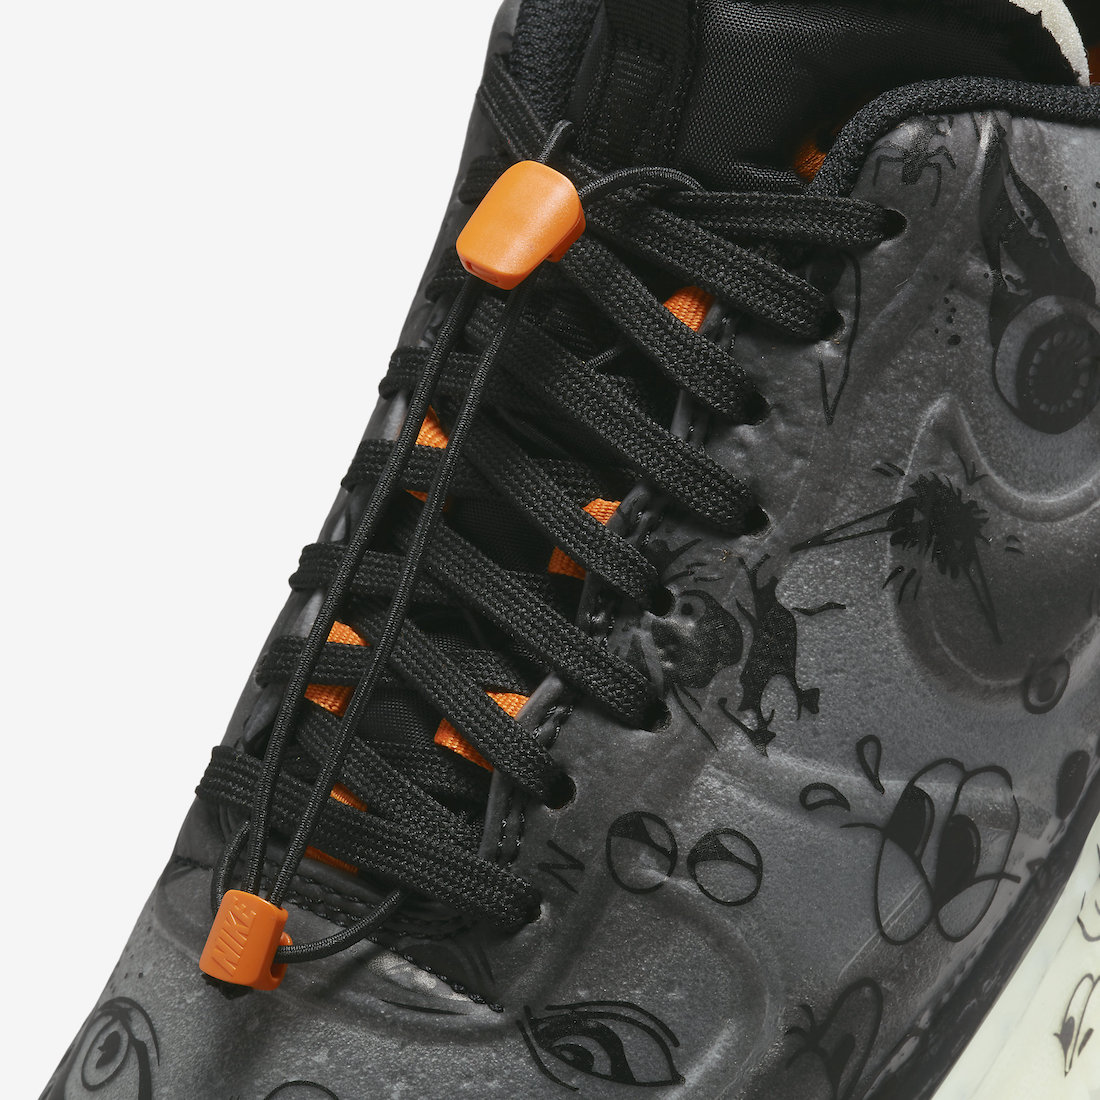 Nike Air Force 1 Experimental Halloween DC8904 001 Release Date 10